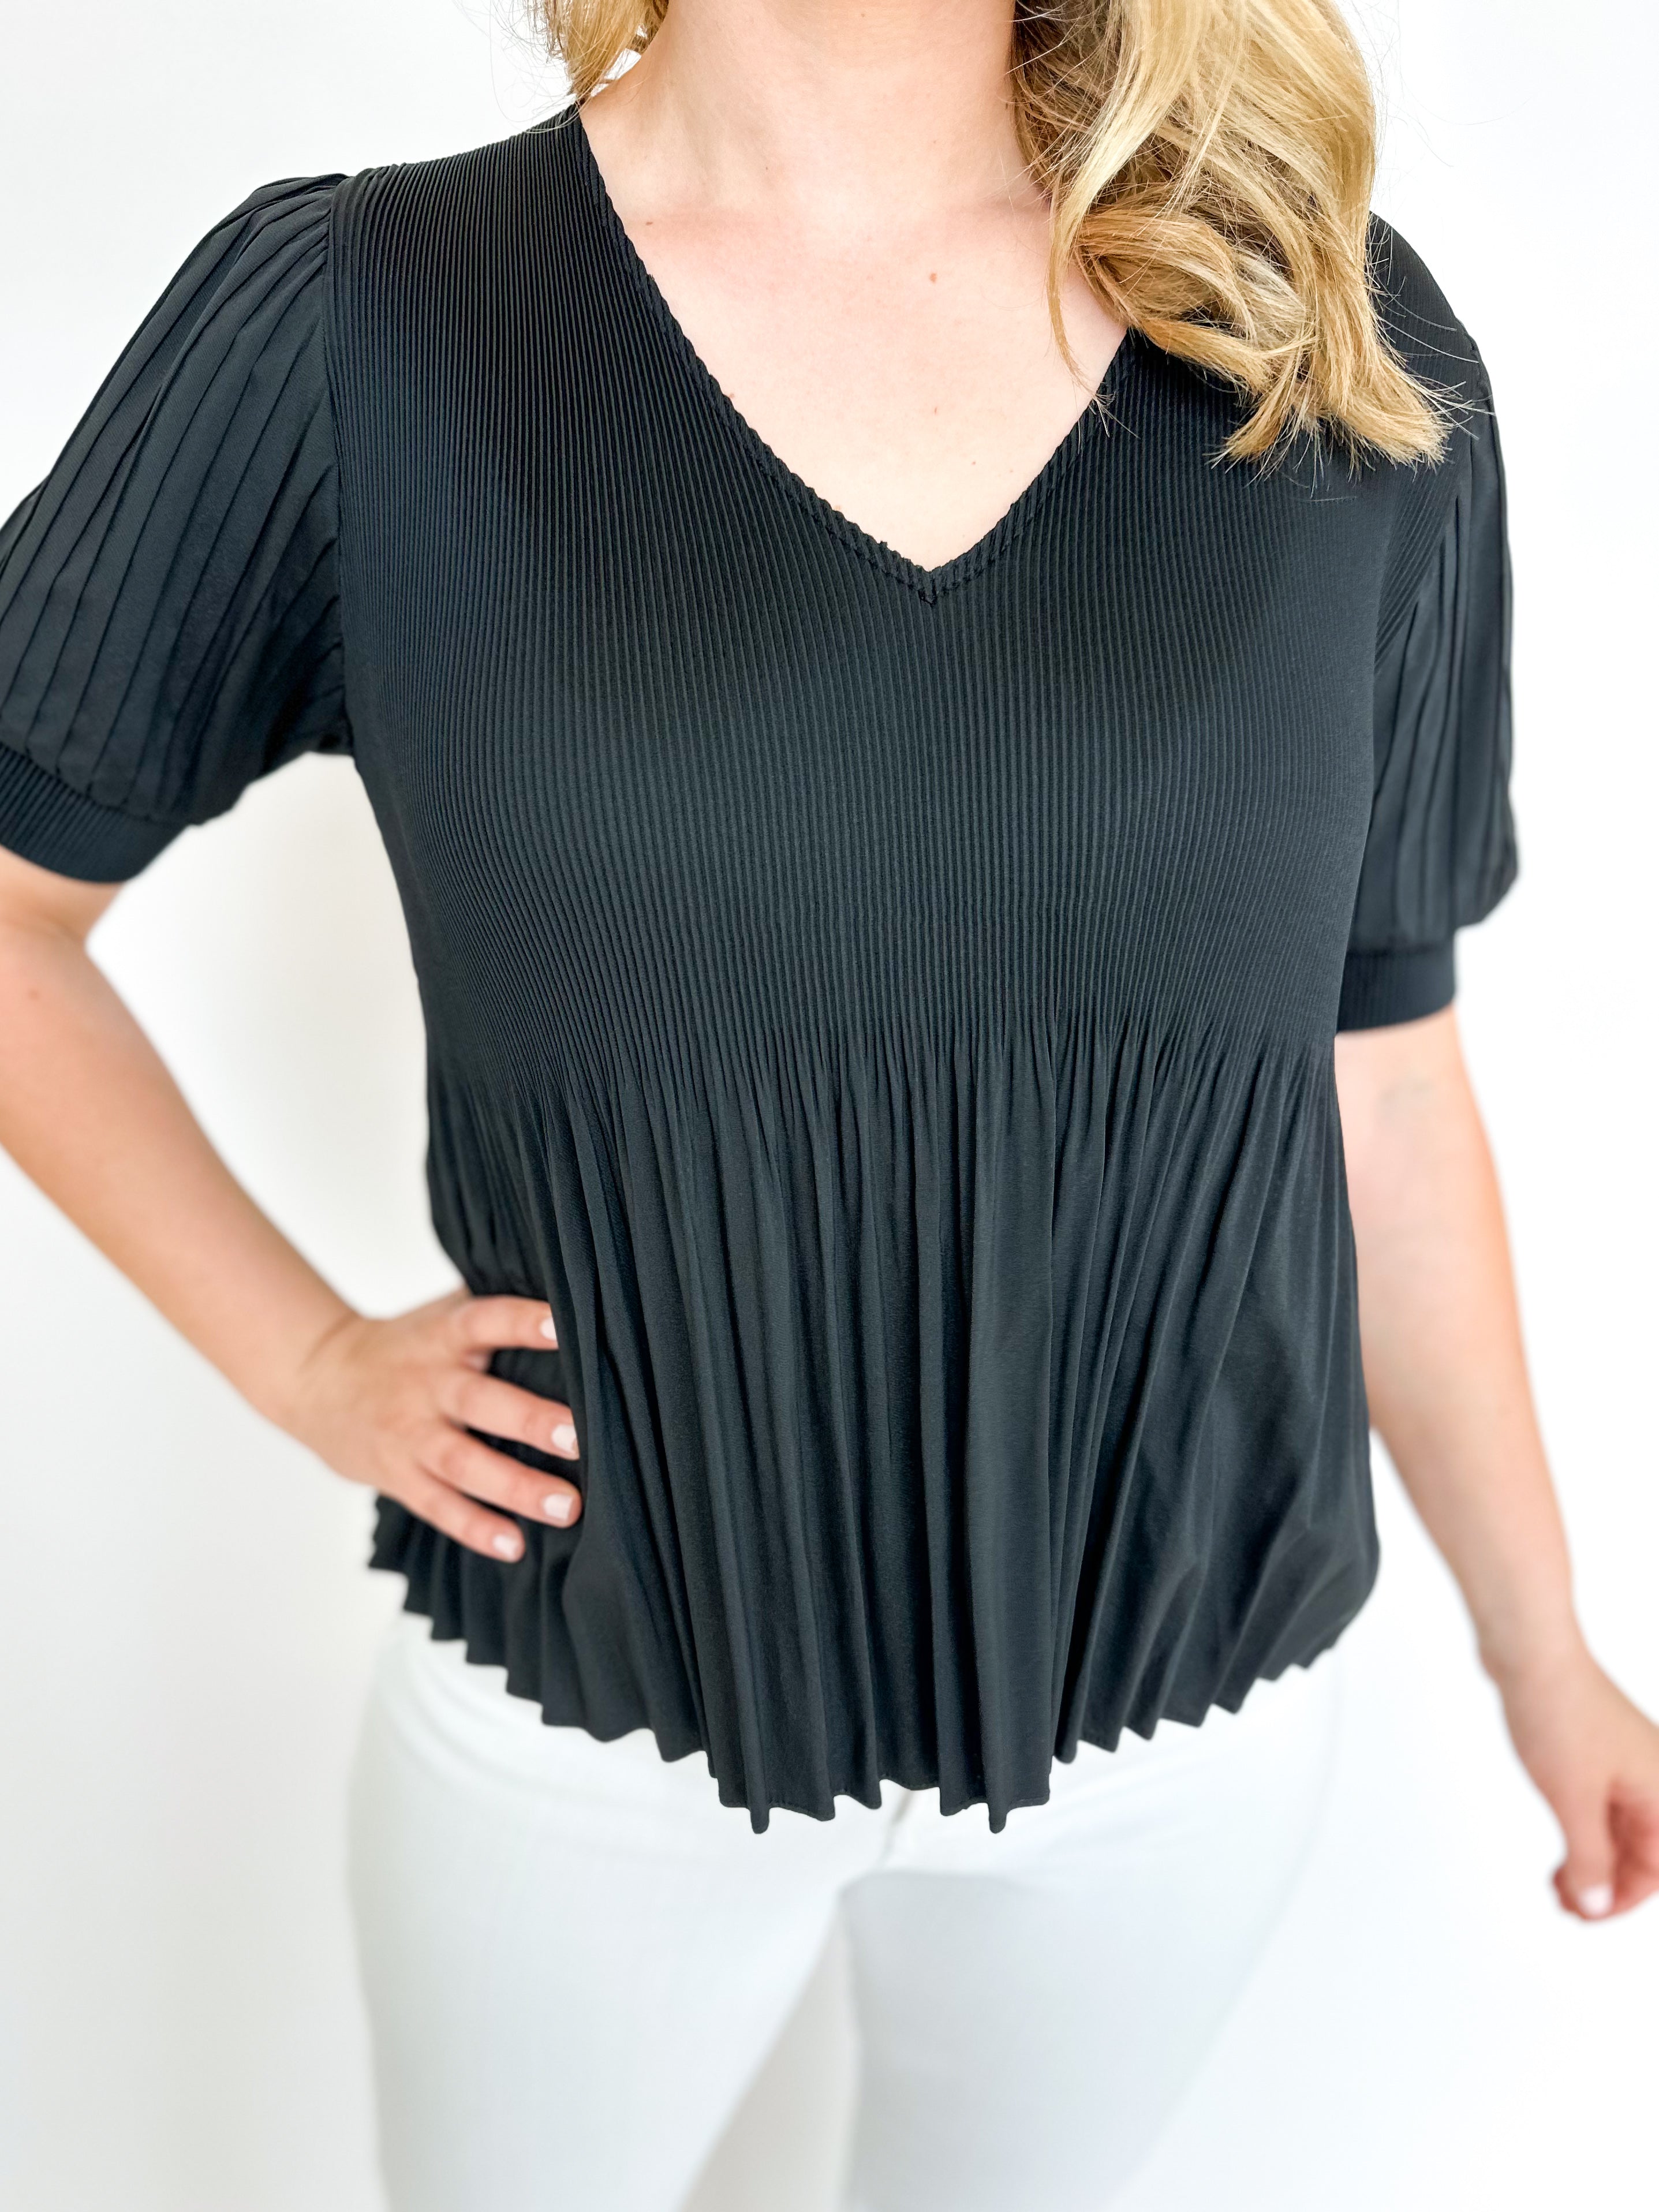 Pleated Peplum Blouse - Black-200 Fashion Blouses-CURRENT AIR CLOTHING-July & June Women's Fashion Boutique Located in San Antonio, Texas